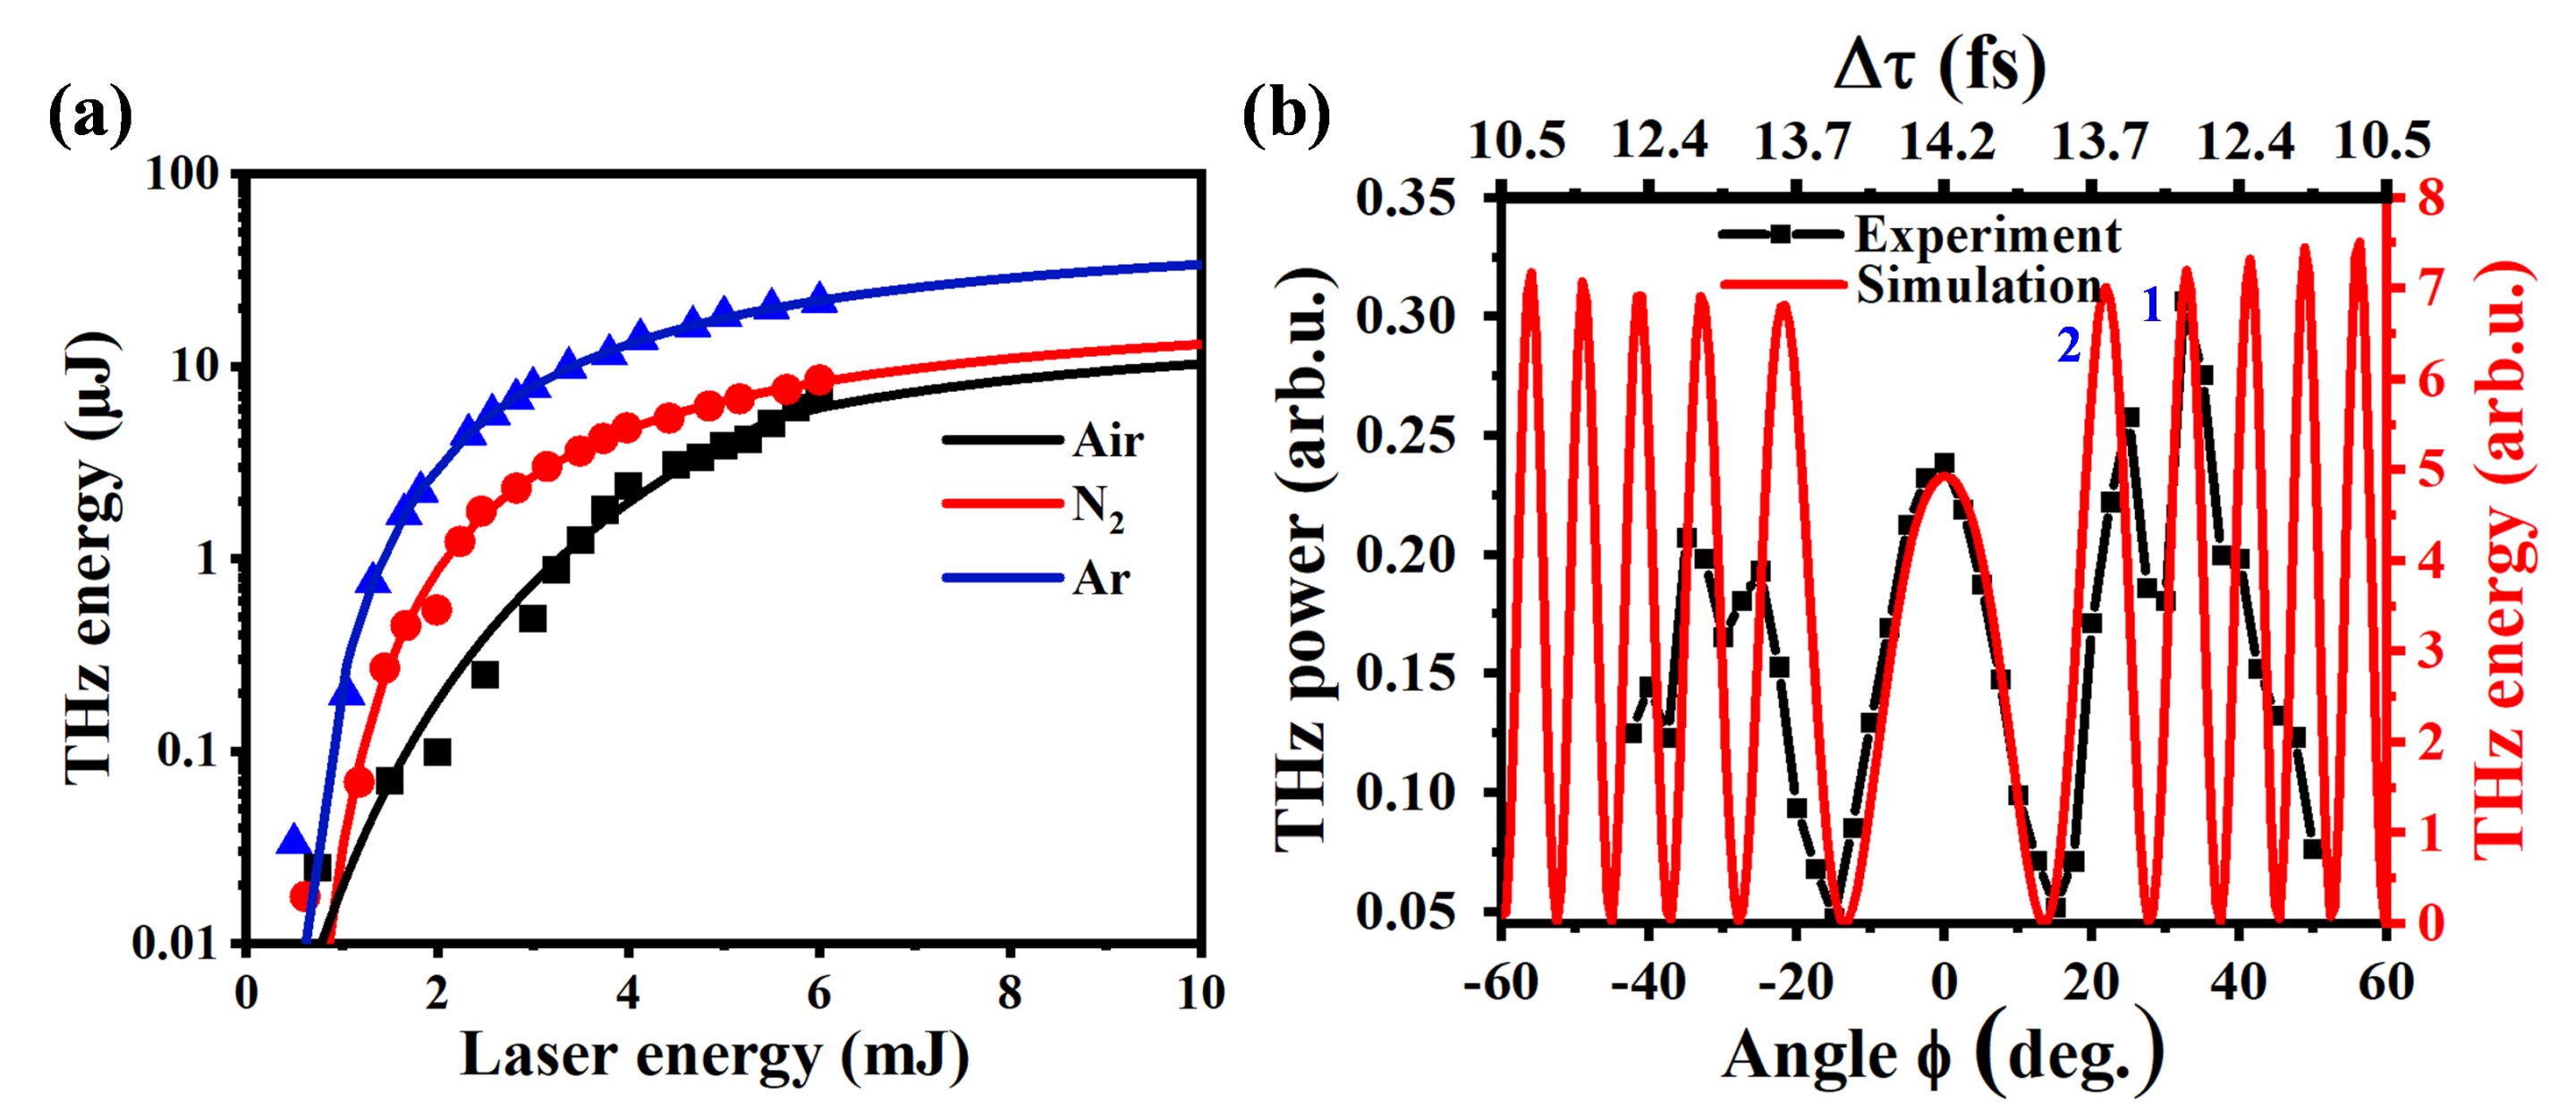 #Sapphire femtosecond laser filamentation in argon at 1 kHz repetition rate